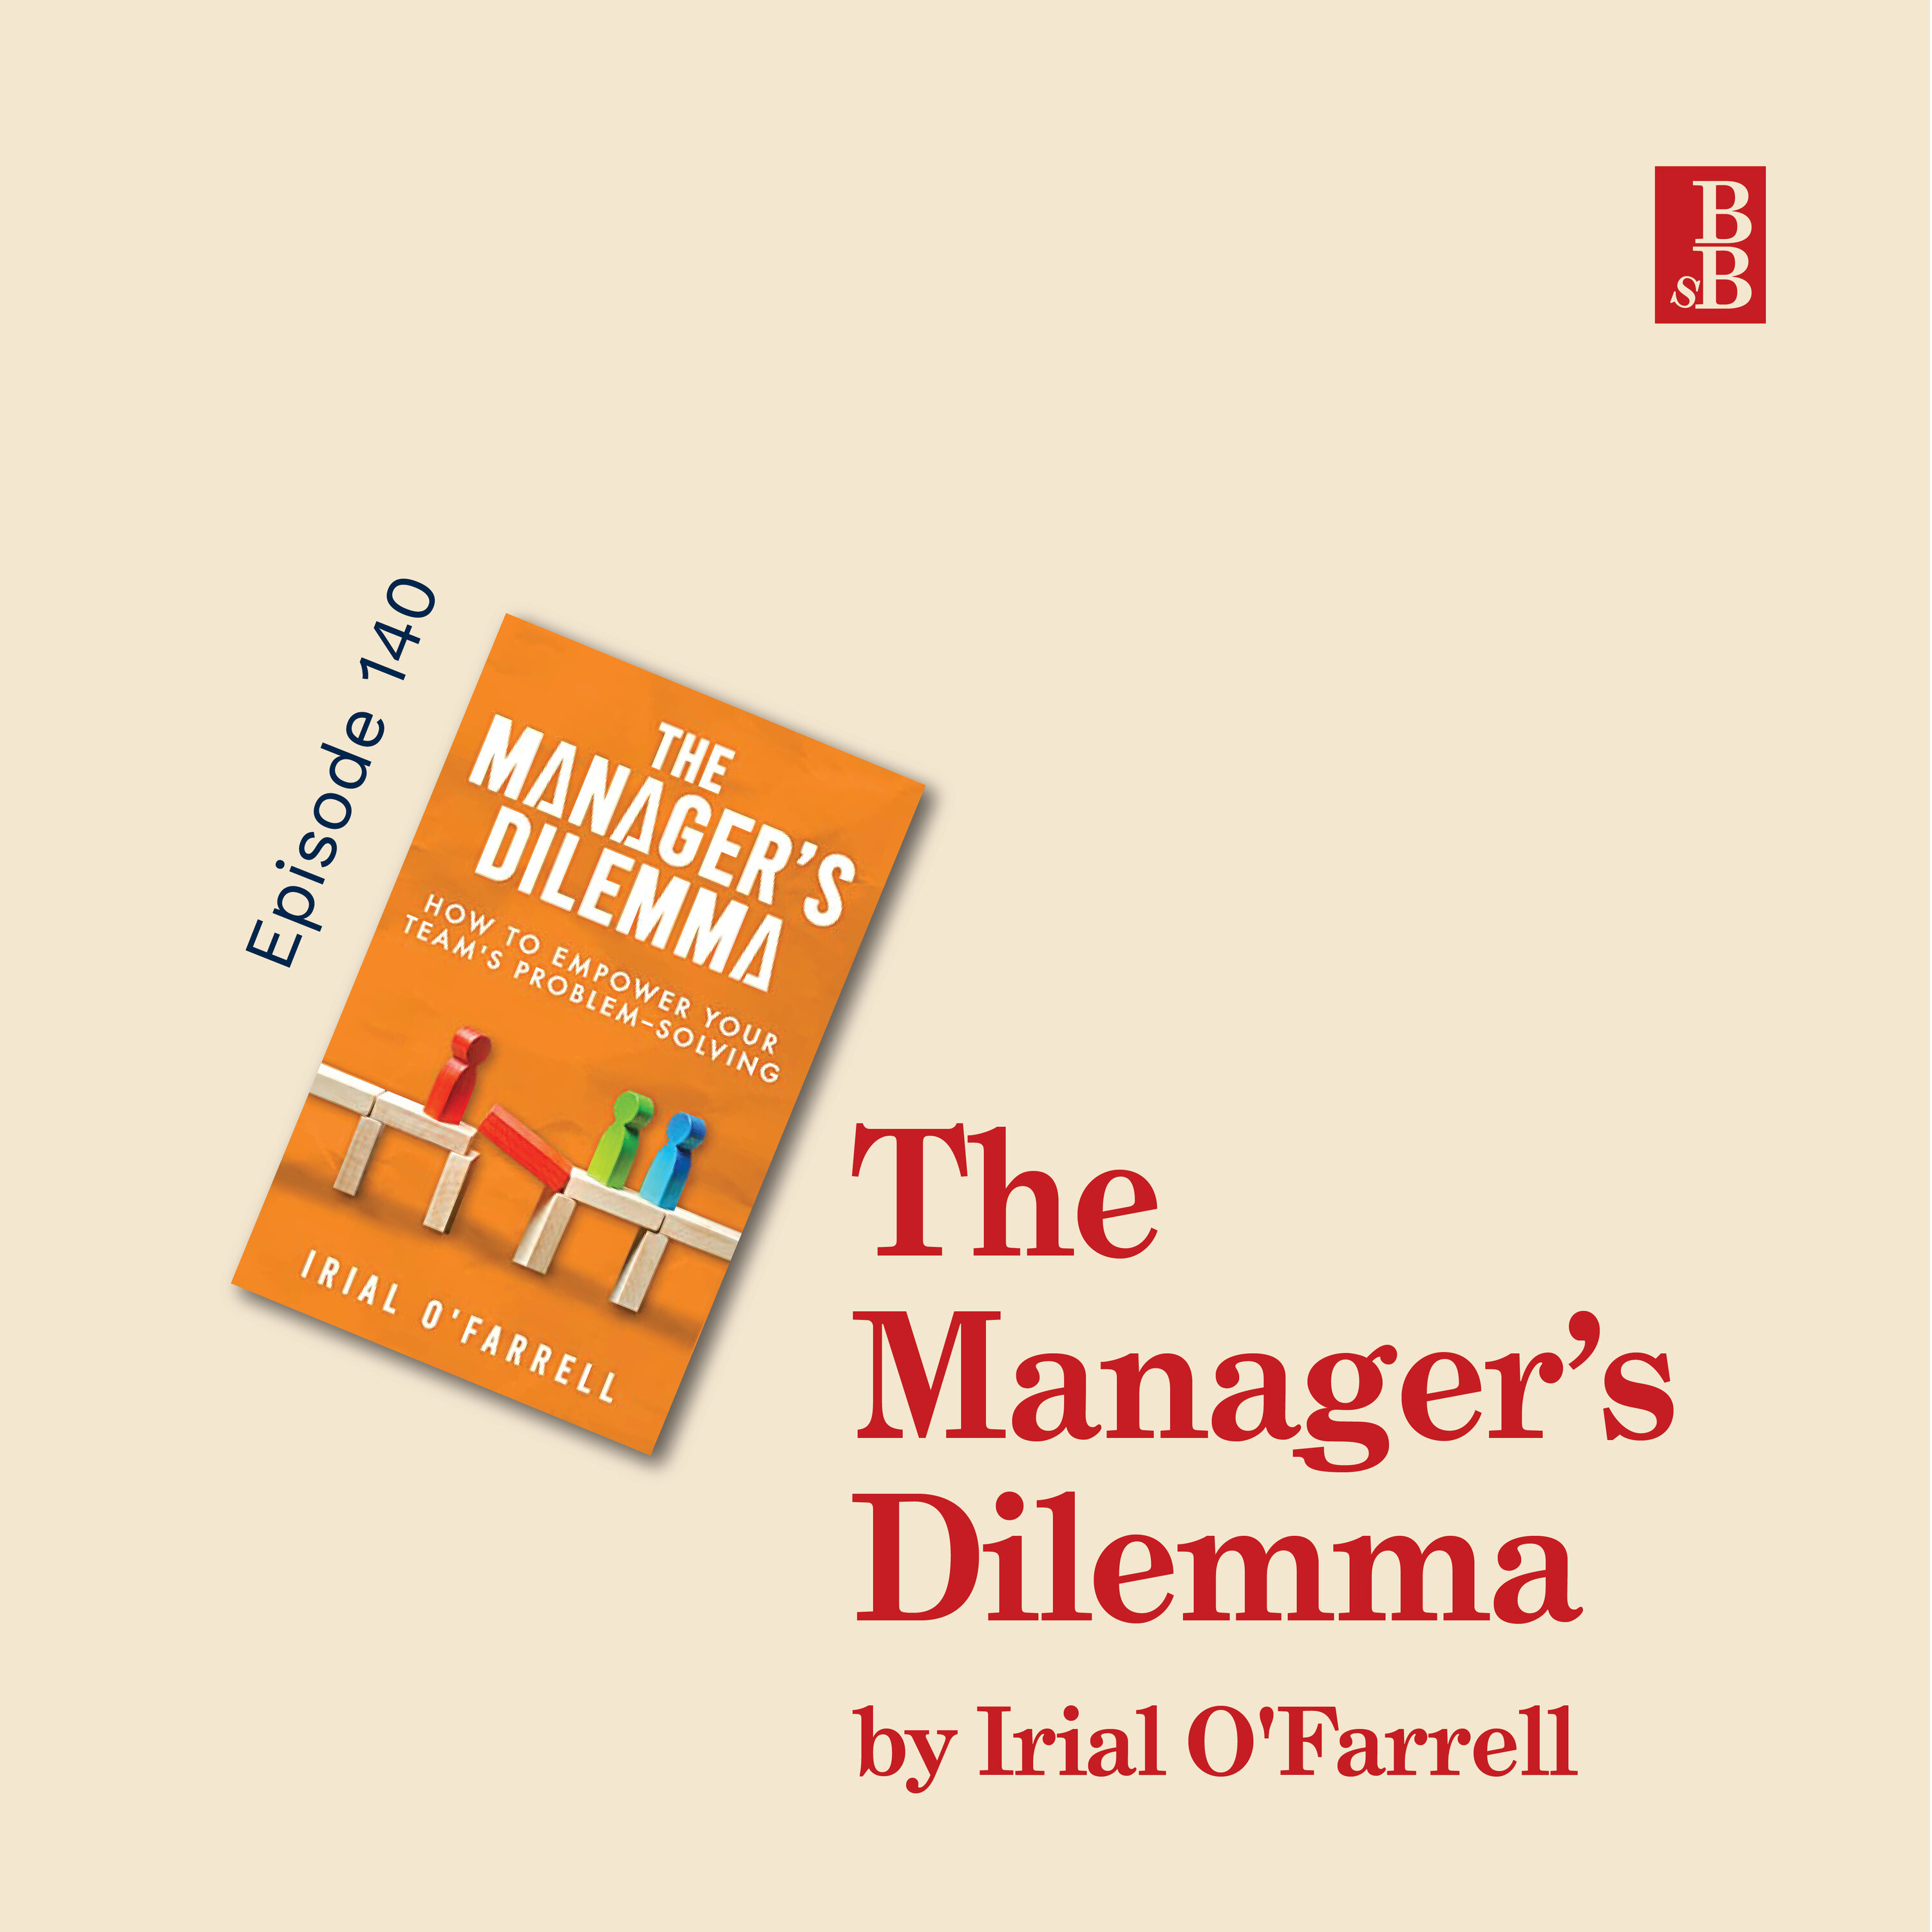 The Manager's Dilemma by Irial O'Farrell: how to solve your problem solving problem Image